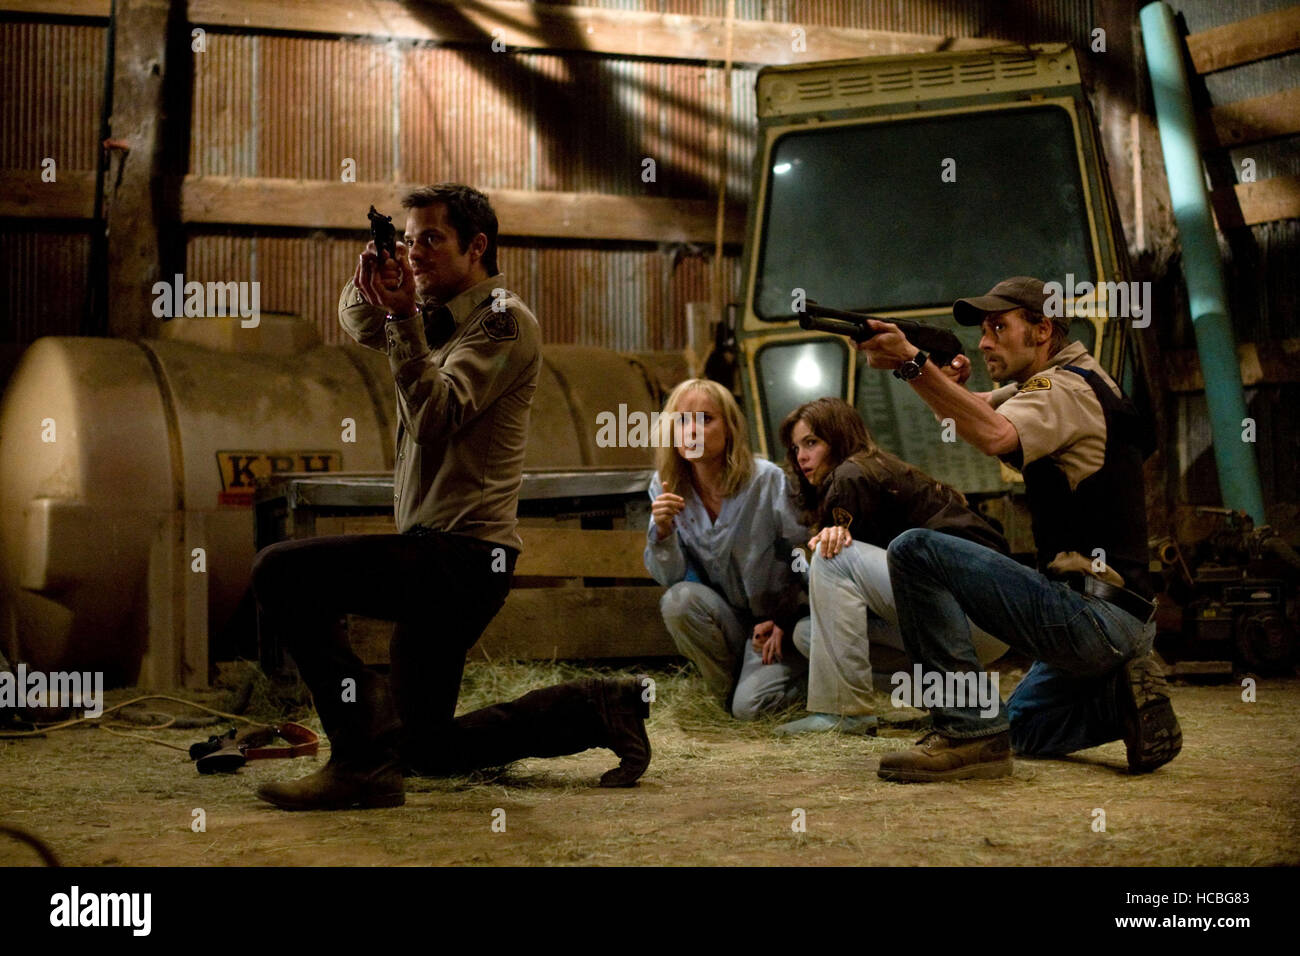 THE CRAZIES, from left: Timothy Olyphant, Radha Mitchell, Danielle Panabaker, Joe Anderson, 2009. ph: Saeed Adyani/©Overture Stock Photo